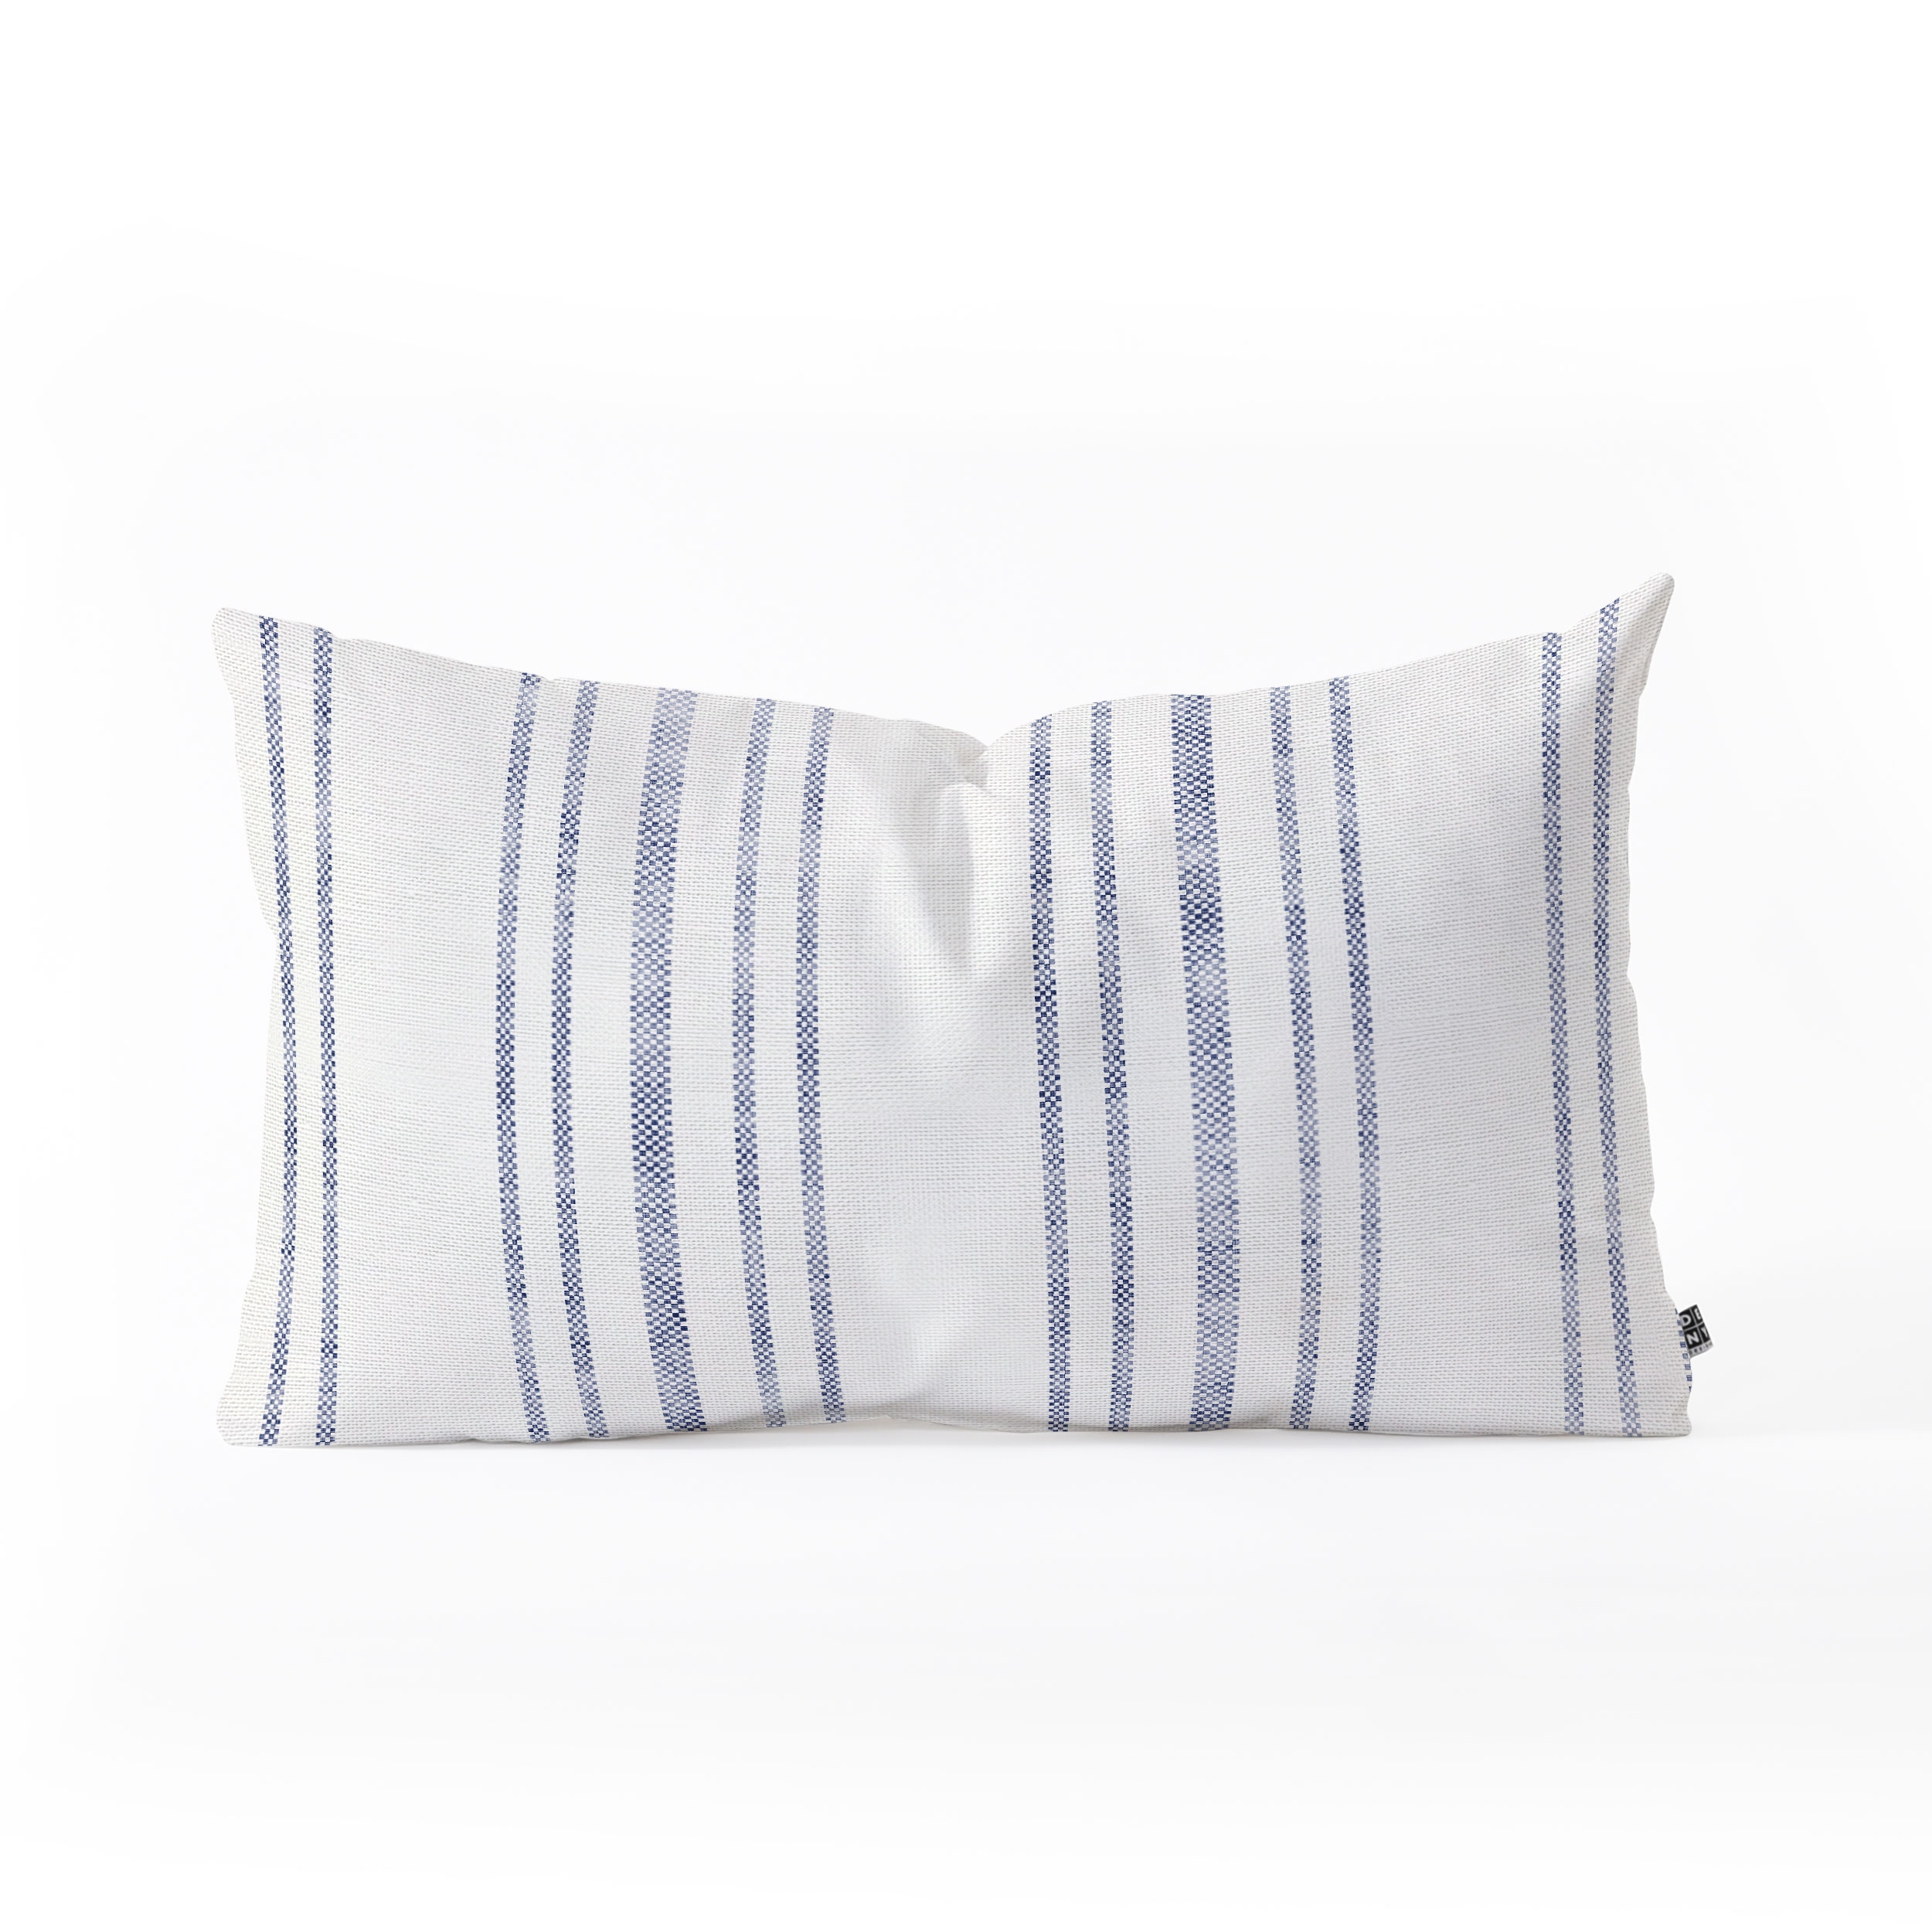 Aegean Multi Stripe by Holli Zollinger - Oblong Throw Pillow 26" x 16" - Image 0